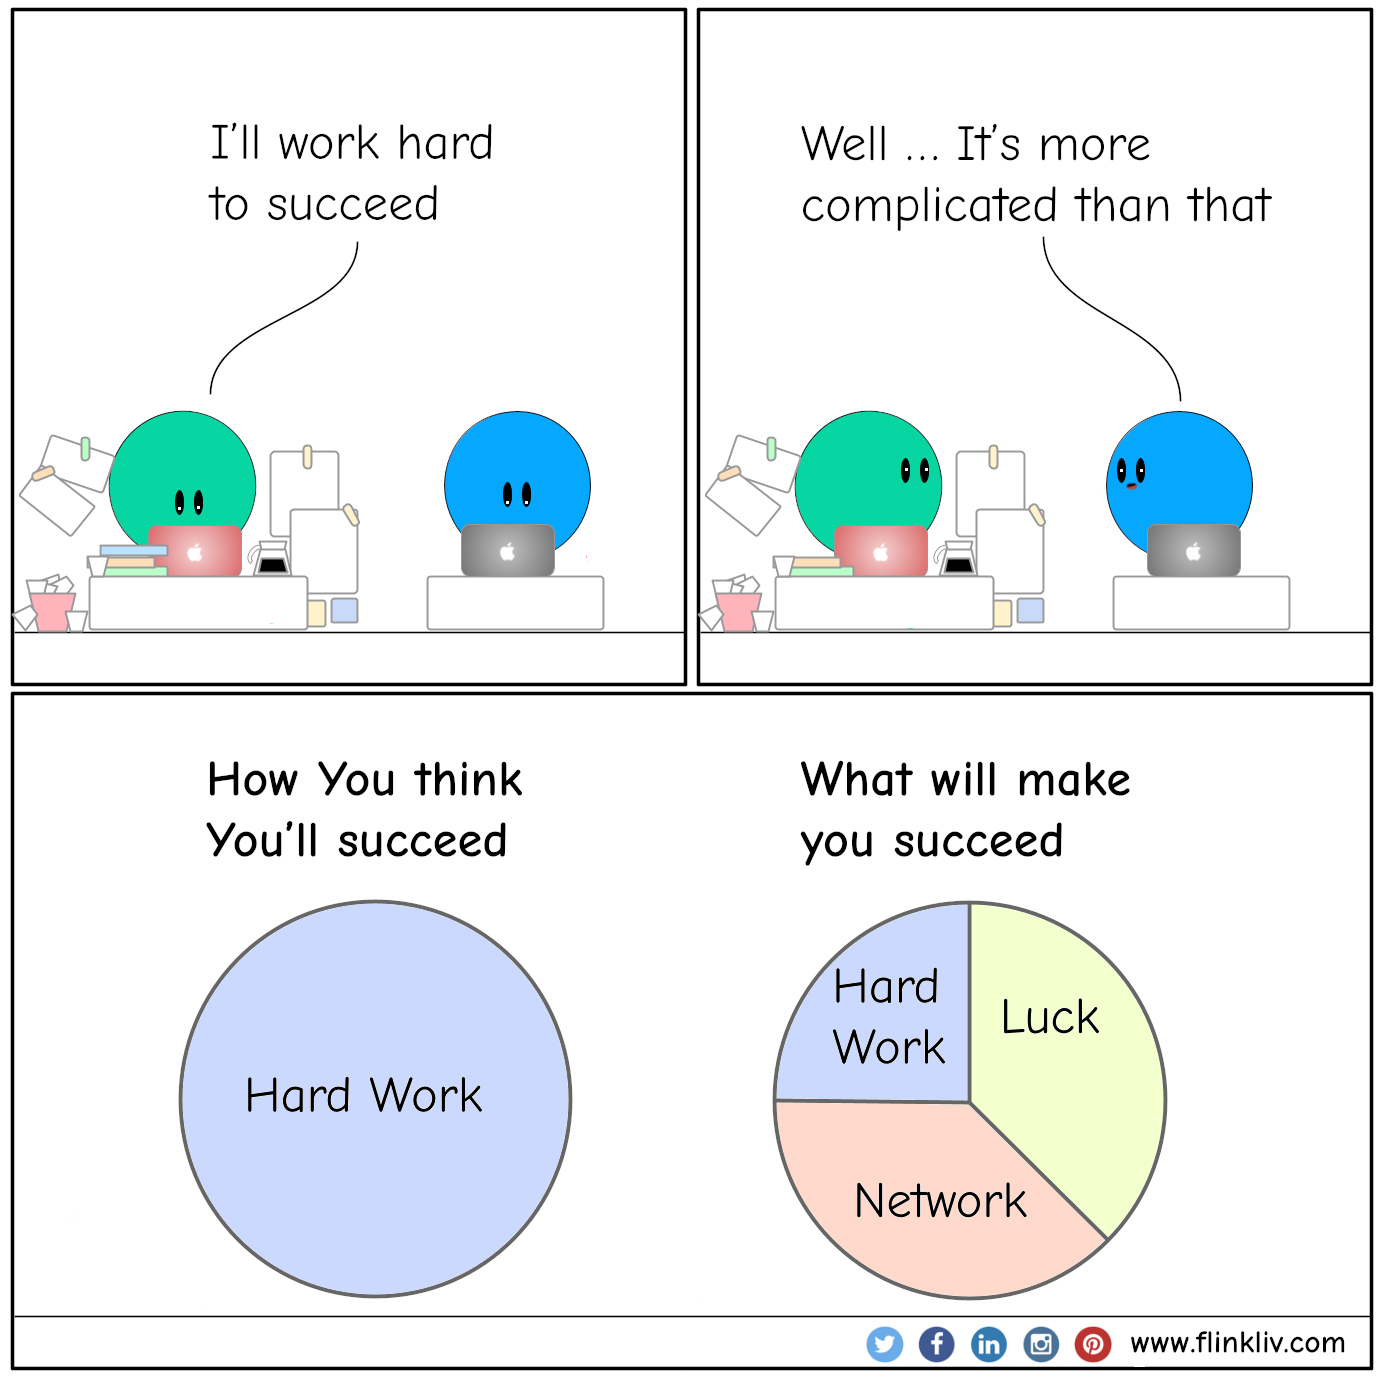 Conversation between A and B about how to succeed
				A: I’ll work hard to succeed
				B: Well, it’s more complicated than that
              